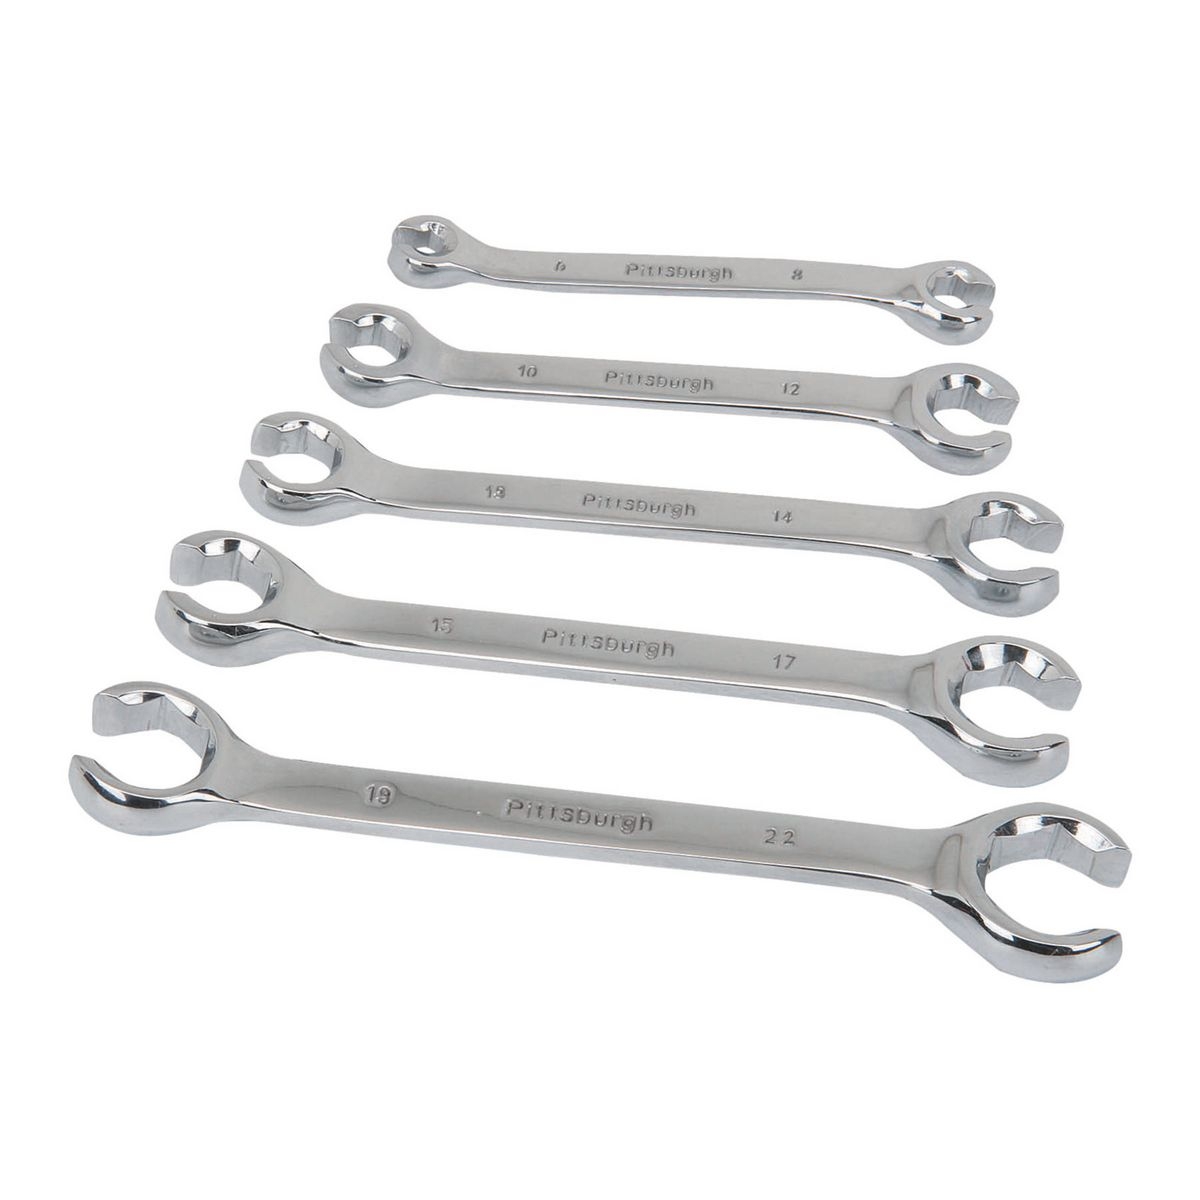 PITTSBURGH Metric Double-End Flare Nut Wrench Set 5 Pc. - Item 68866 / 57109 / 61357